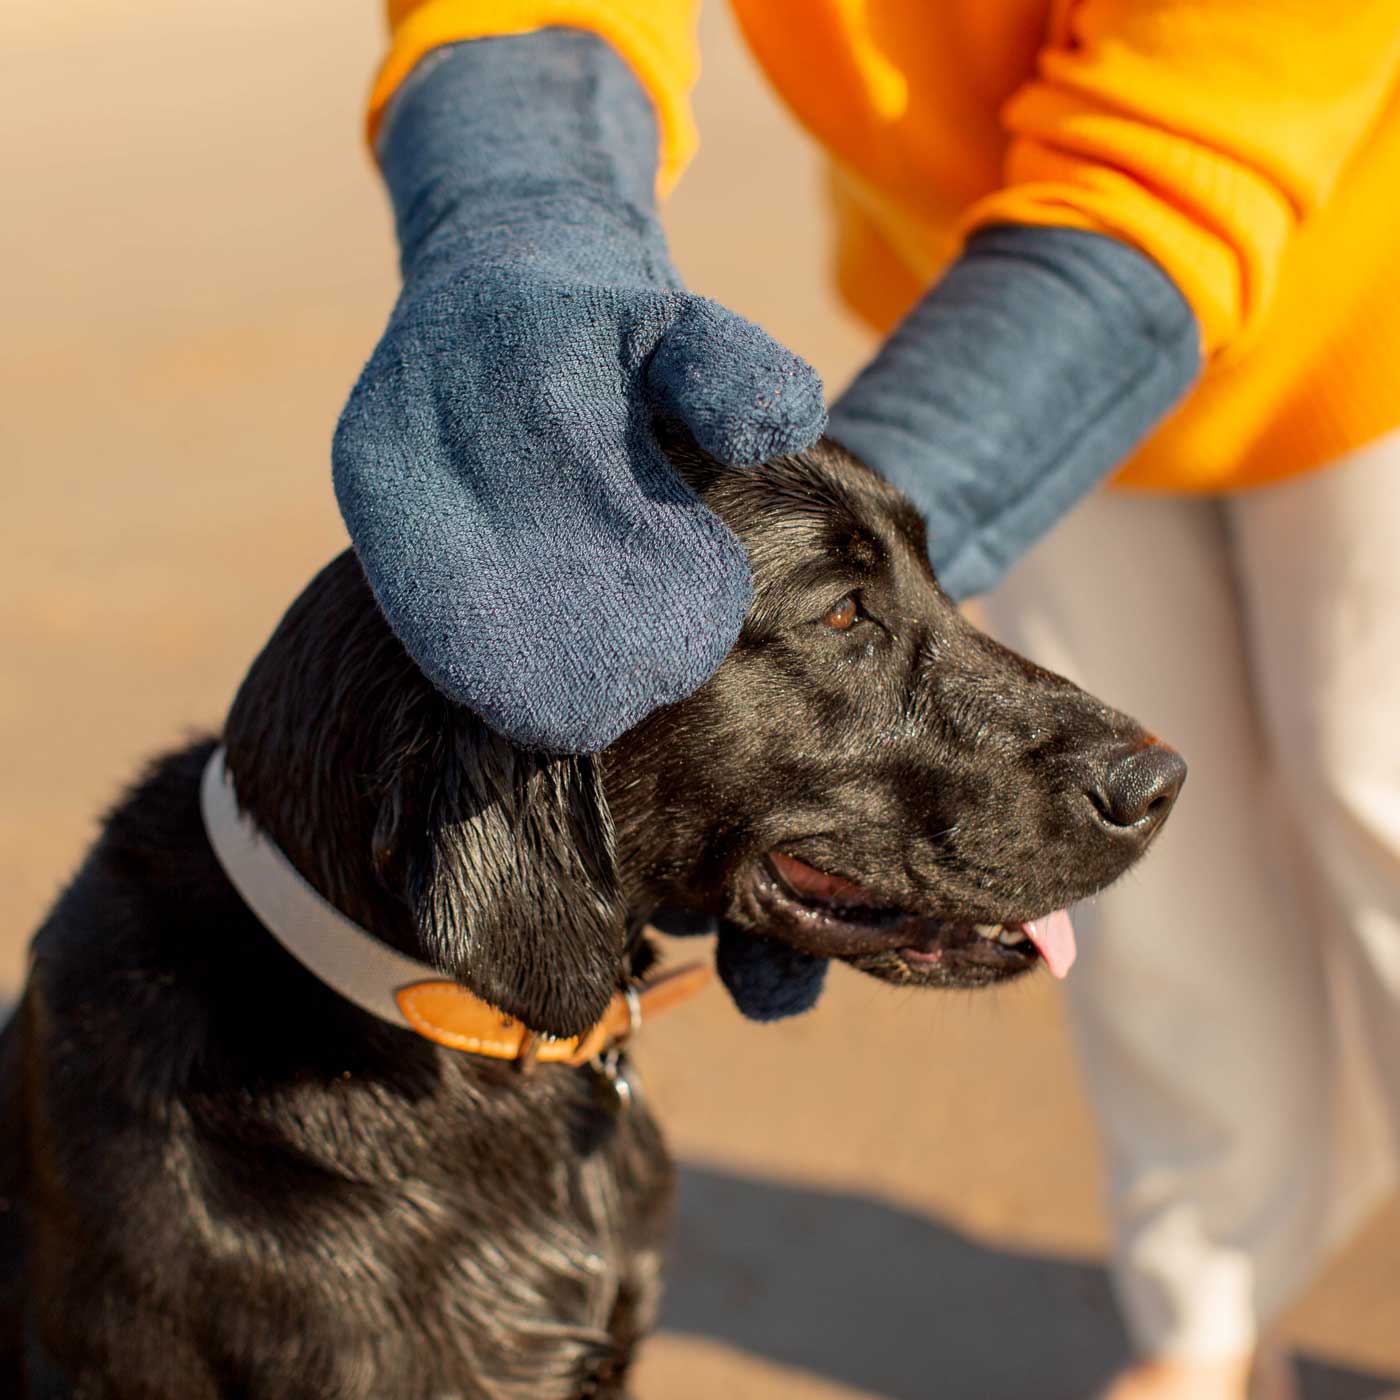 Introducing the ultimate bamboo dog drying mitts in beautiful Navy, made from luxurious bamboo to aid sensitive skin featuring universal size to fit all with super absorbent material for easy pet drying! The perfect dog drying gloves, available now at Lords & Labradors US, In four colors!